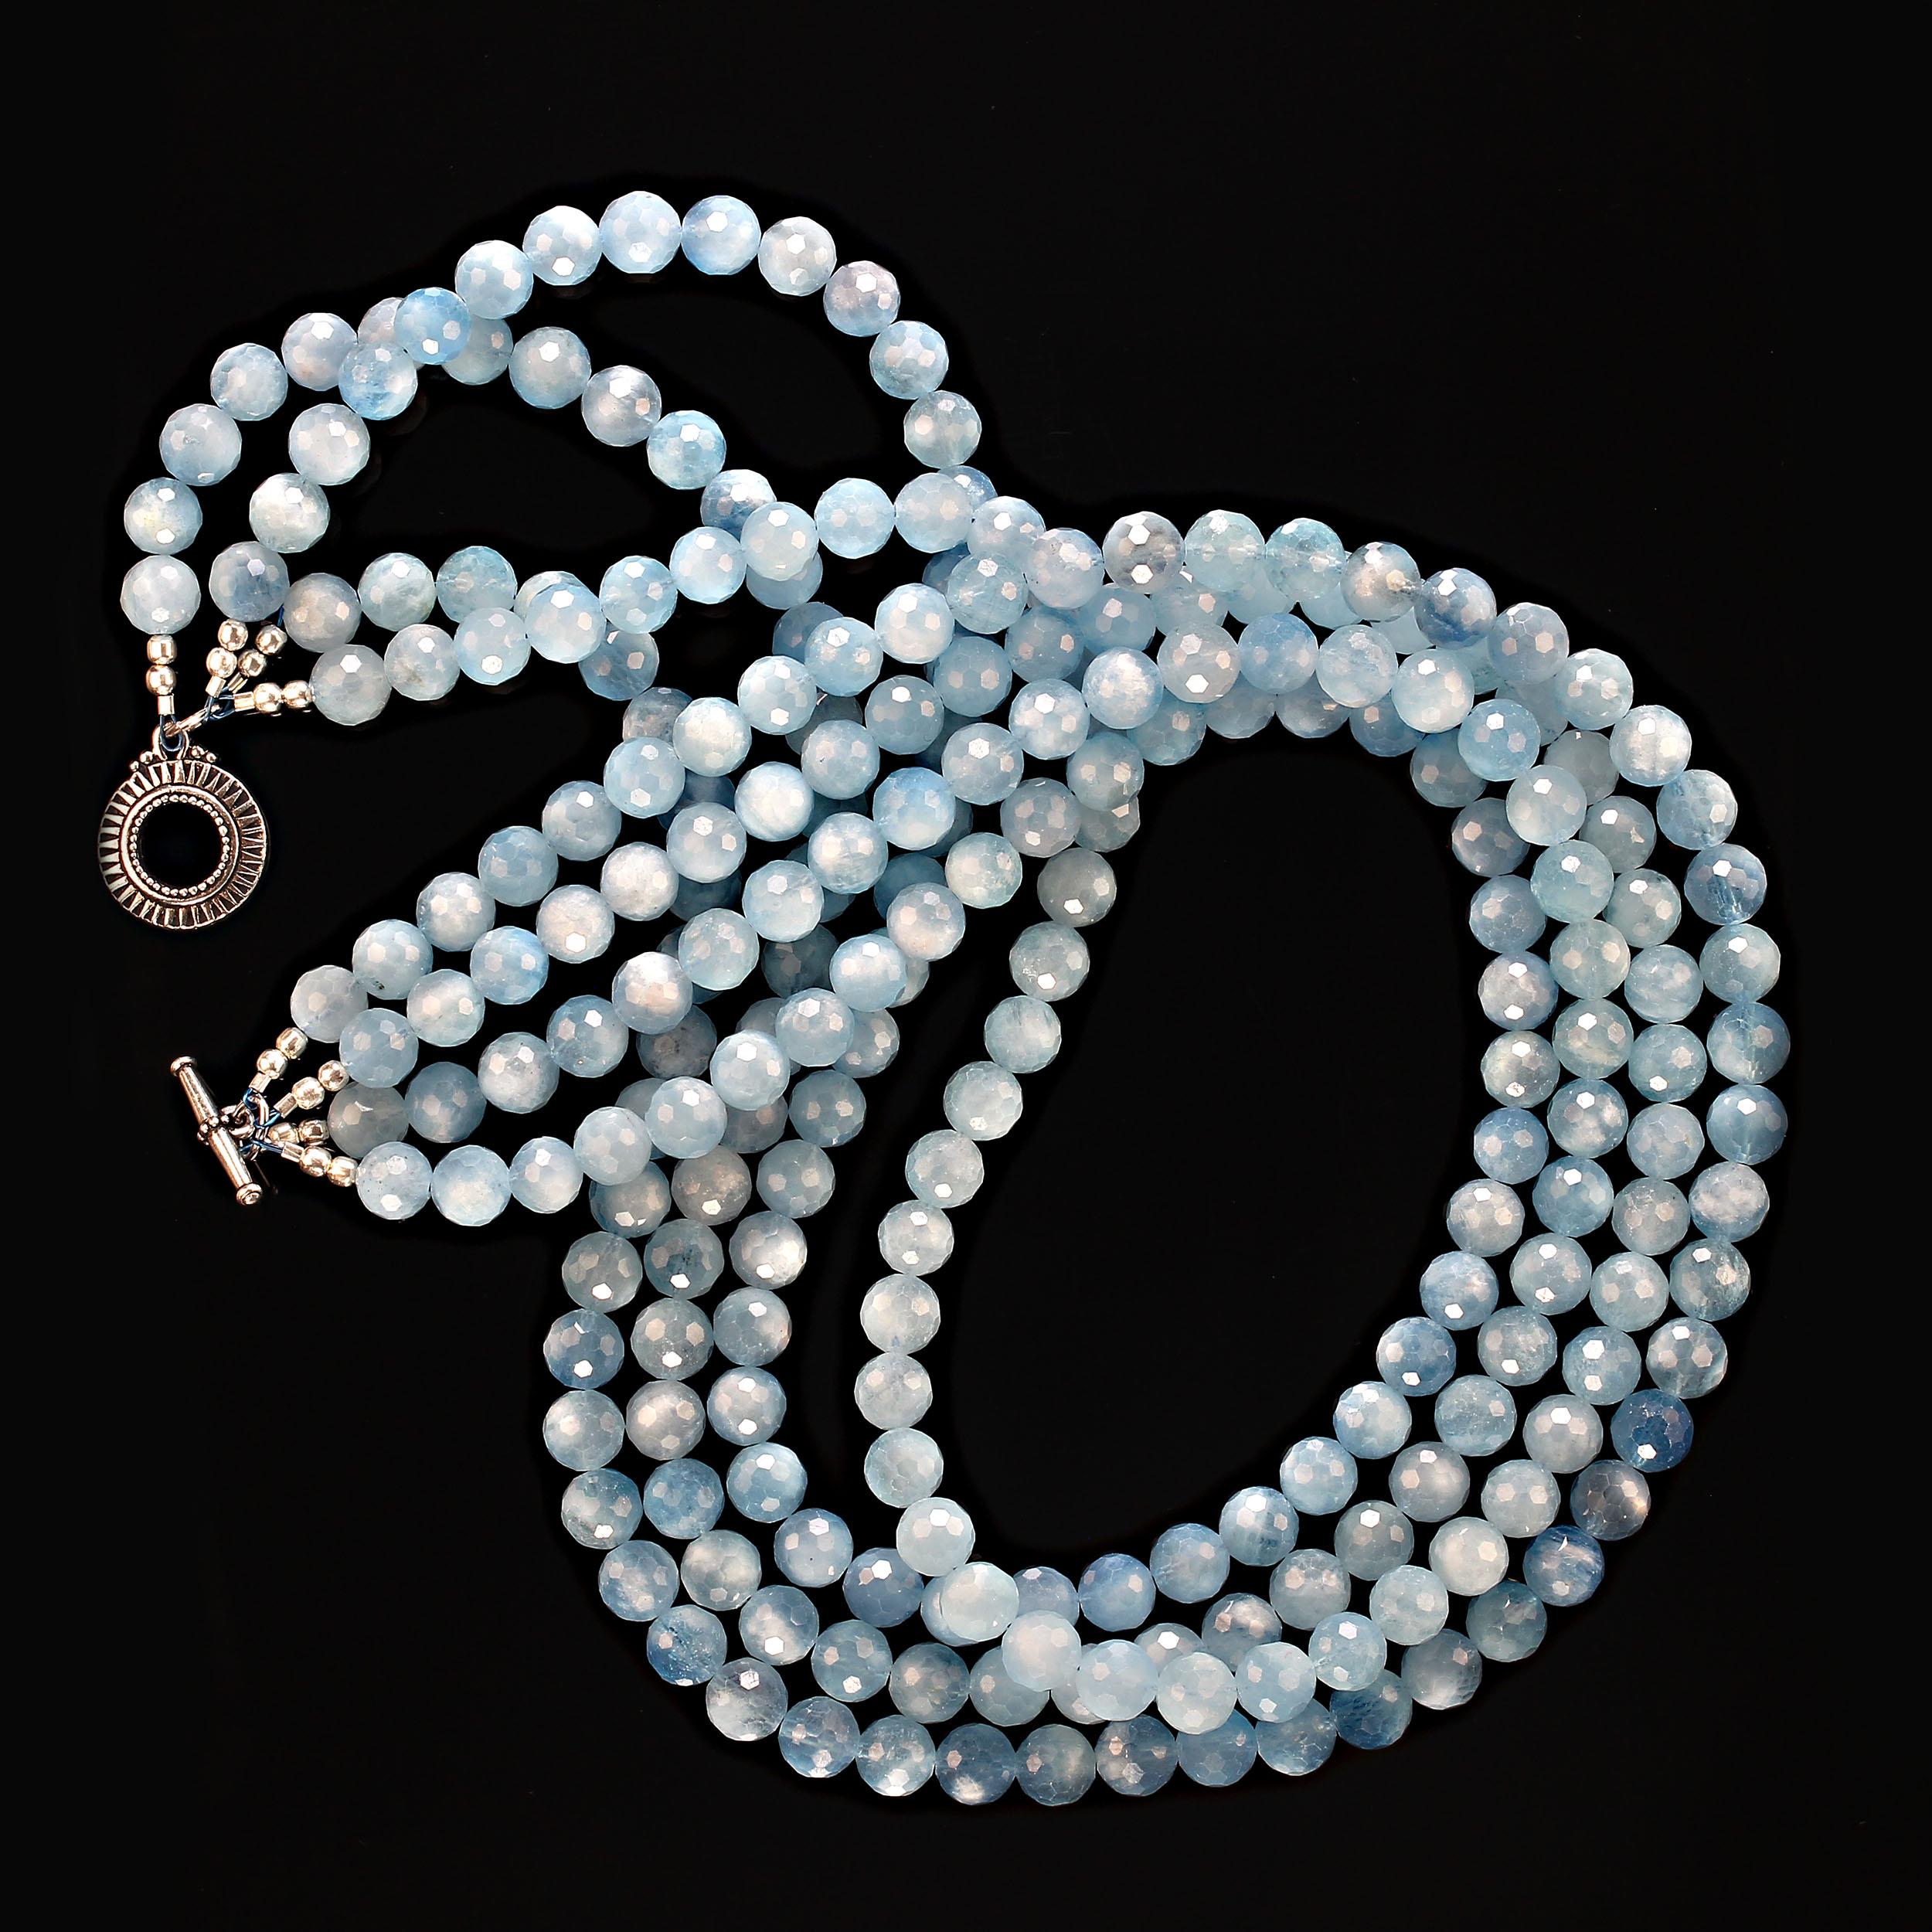 21 Inch Aquamarine necklace of four stands.  This gorgeous necklace features 8mm matte finished faceted aquamarines. The necklace can be worn with the strands lying flat upon each other or gently twisted. 
The necklace is secured with an easy-to-use